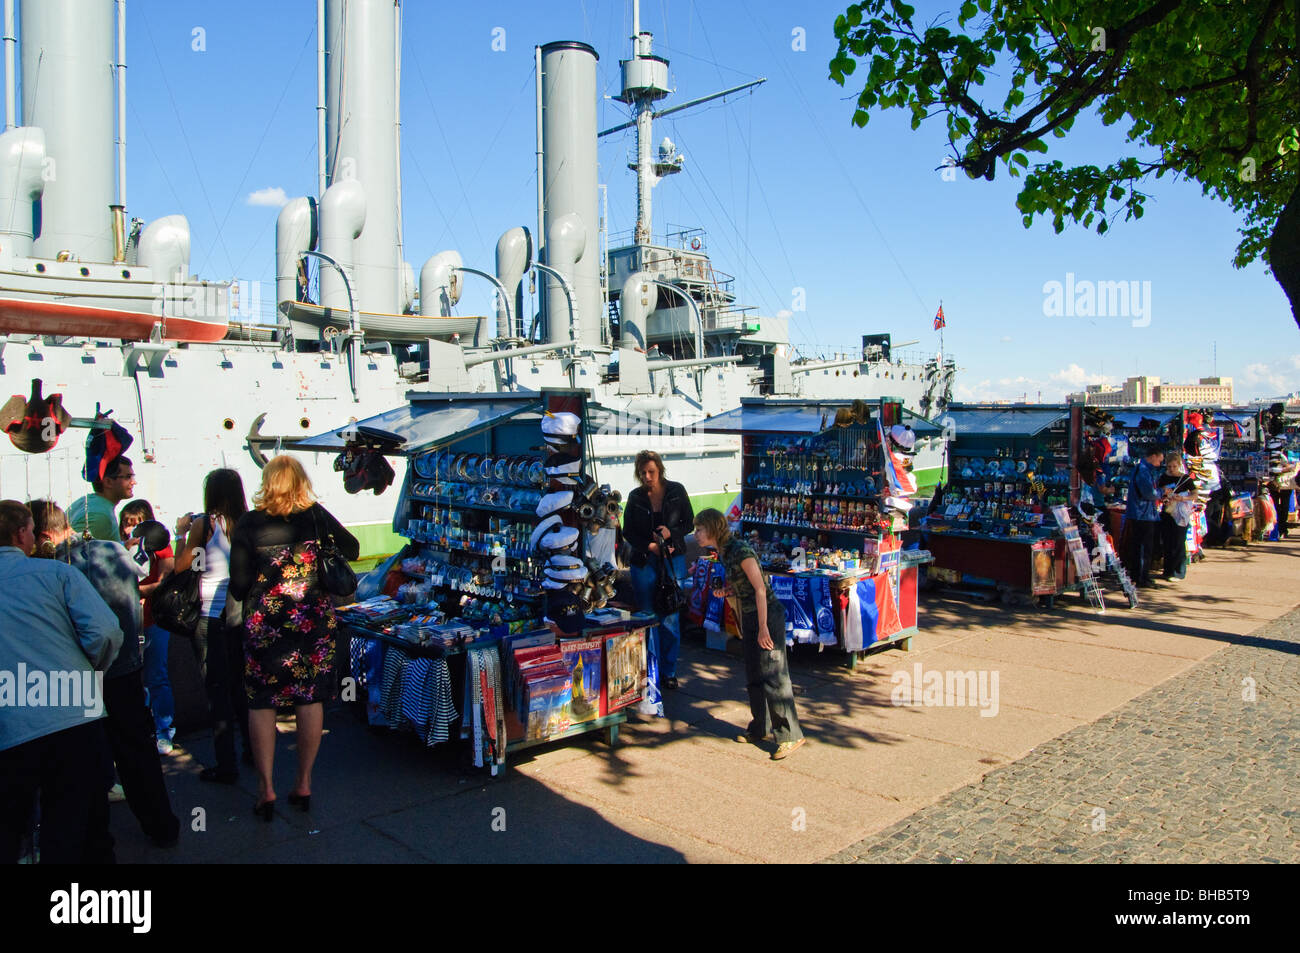 Souvenir stalls beside the Cruiser Aurora, famous for firing the shot which launched the Revolution, St Petersburg, Russia Stock Photo